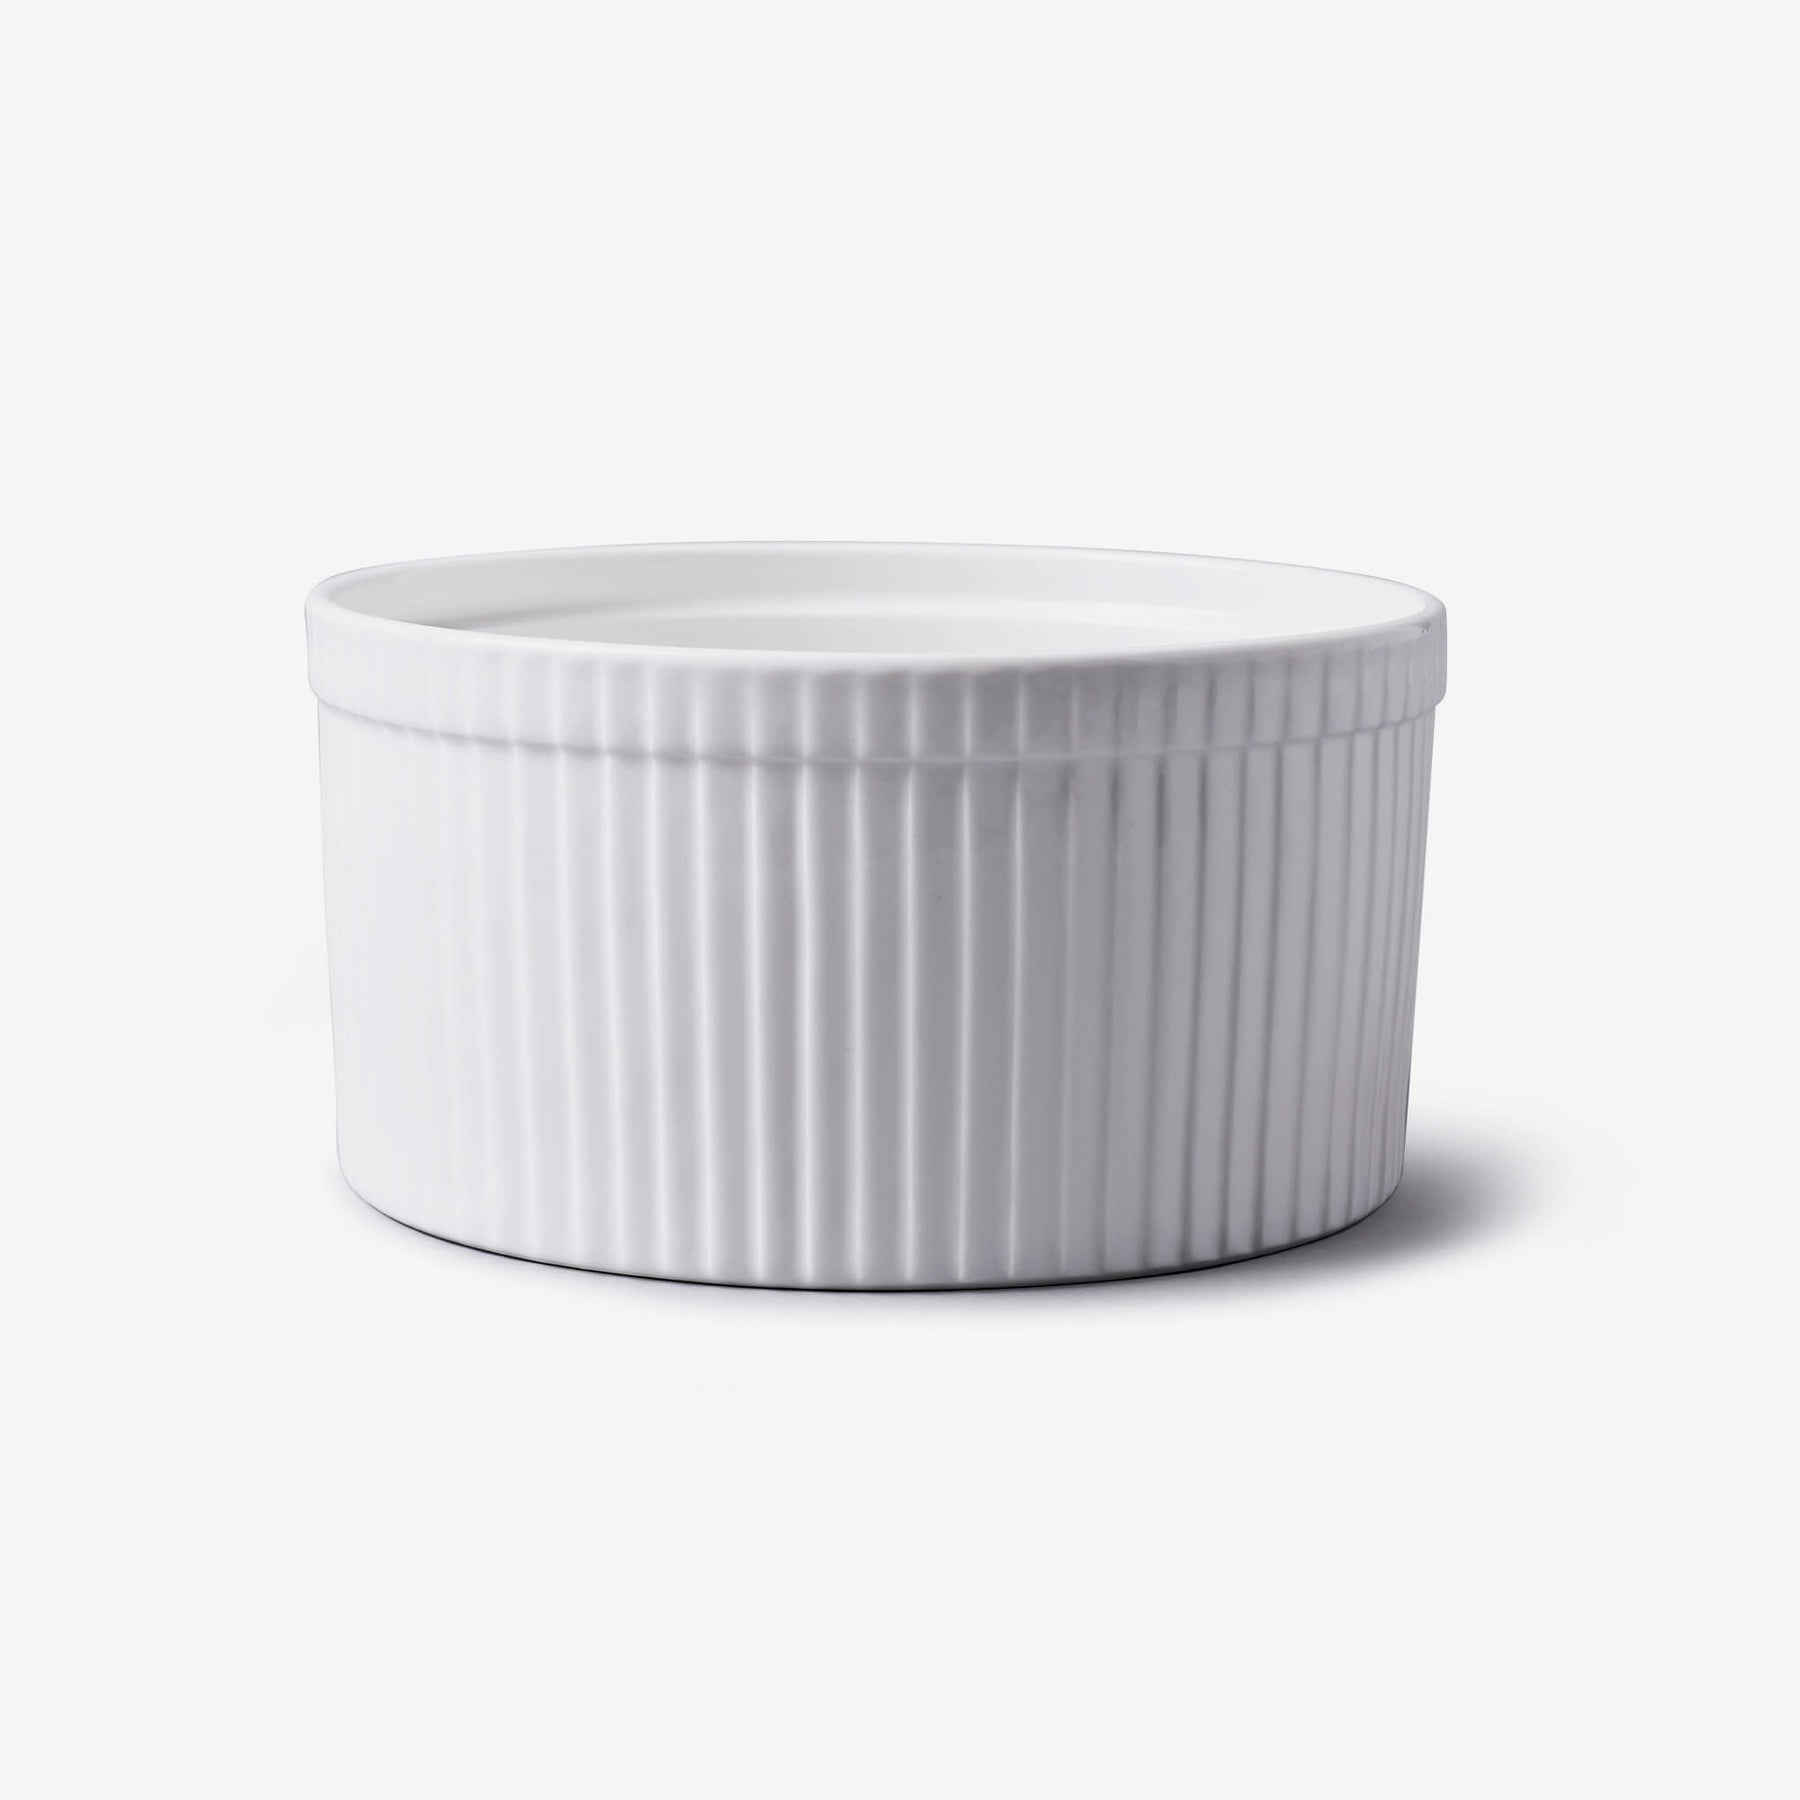 Porcelain Souffle Dish, Available in 3 Sizes